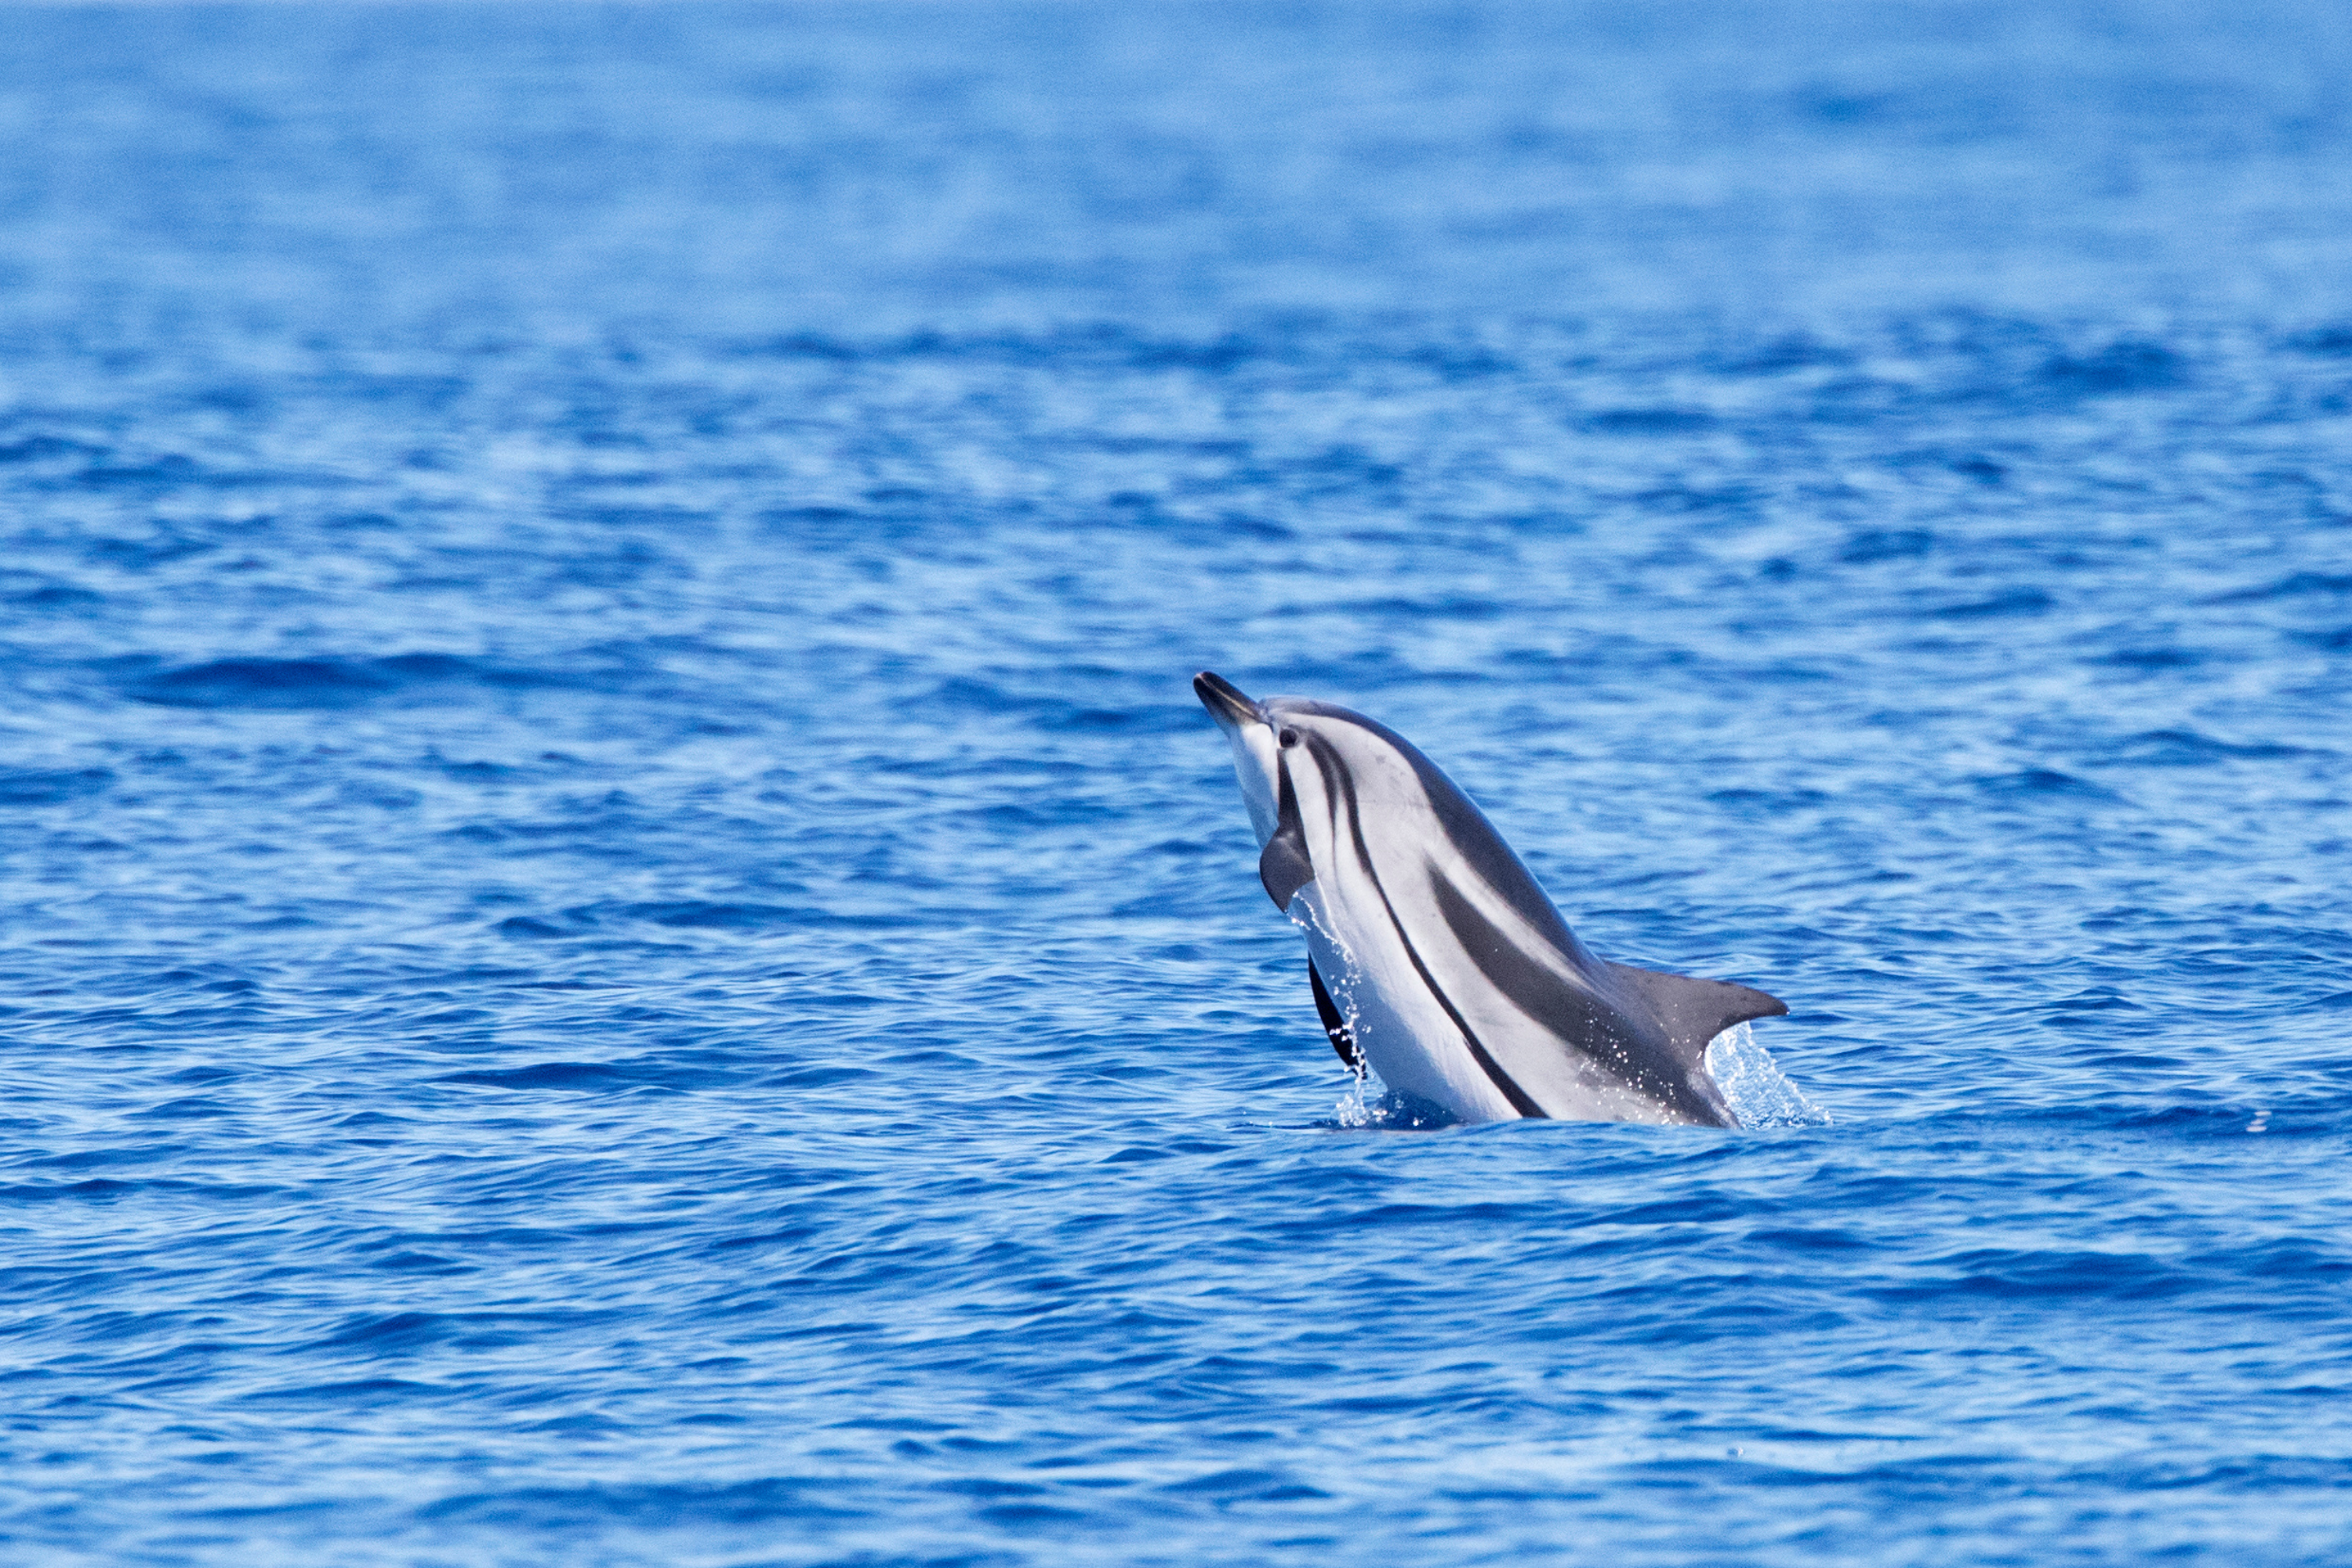 Striped dolphin in the Azores, Portugal. Image credit: Canva. Alt text: a dolphin in the sea.